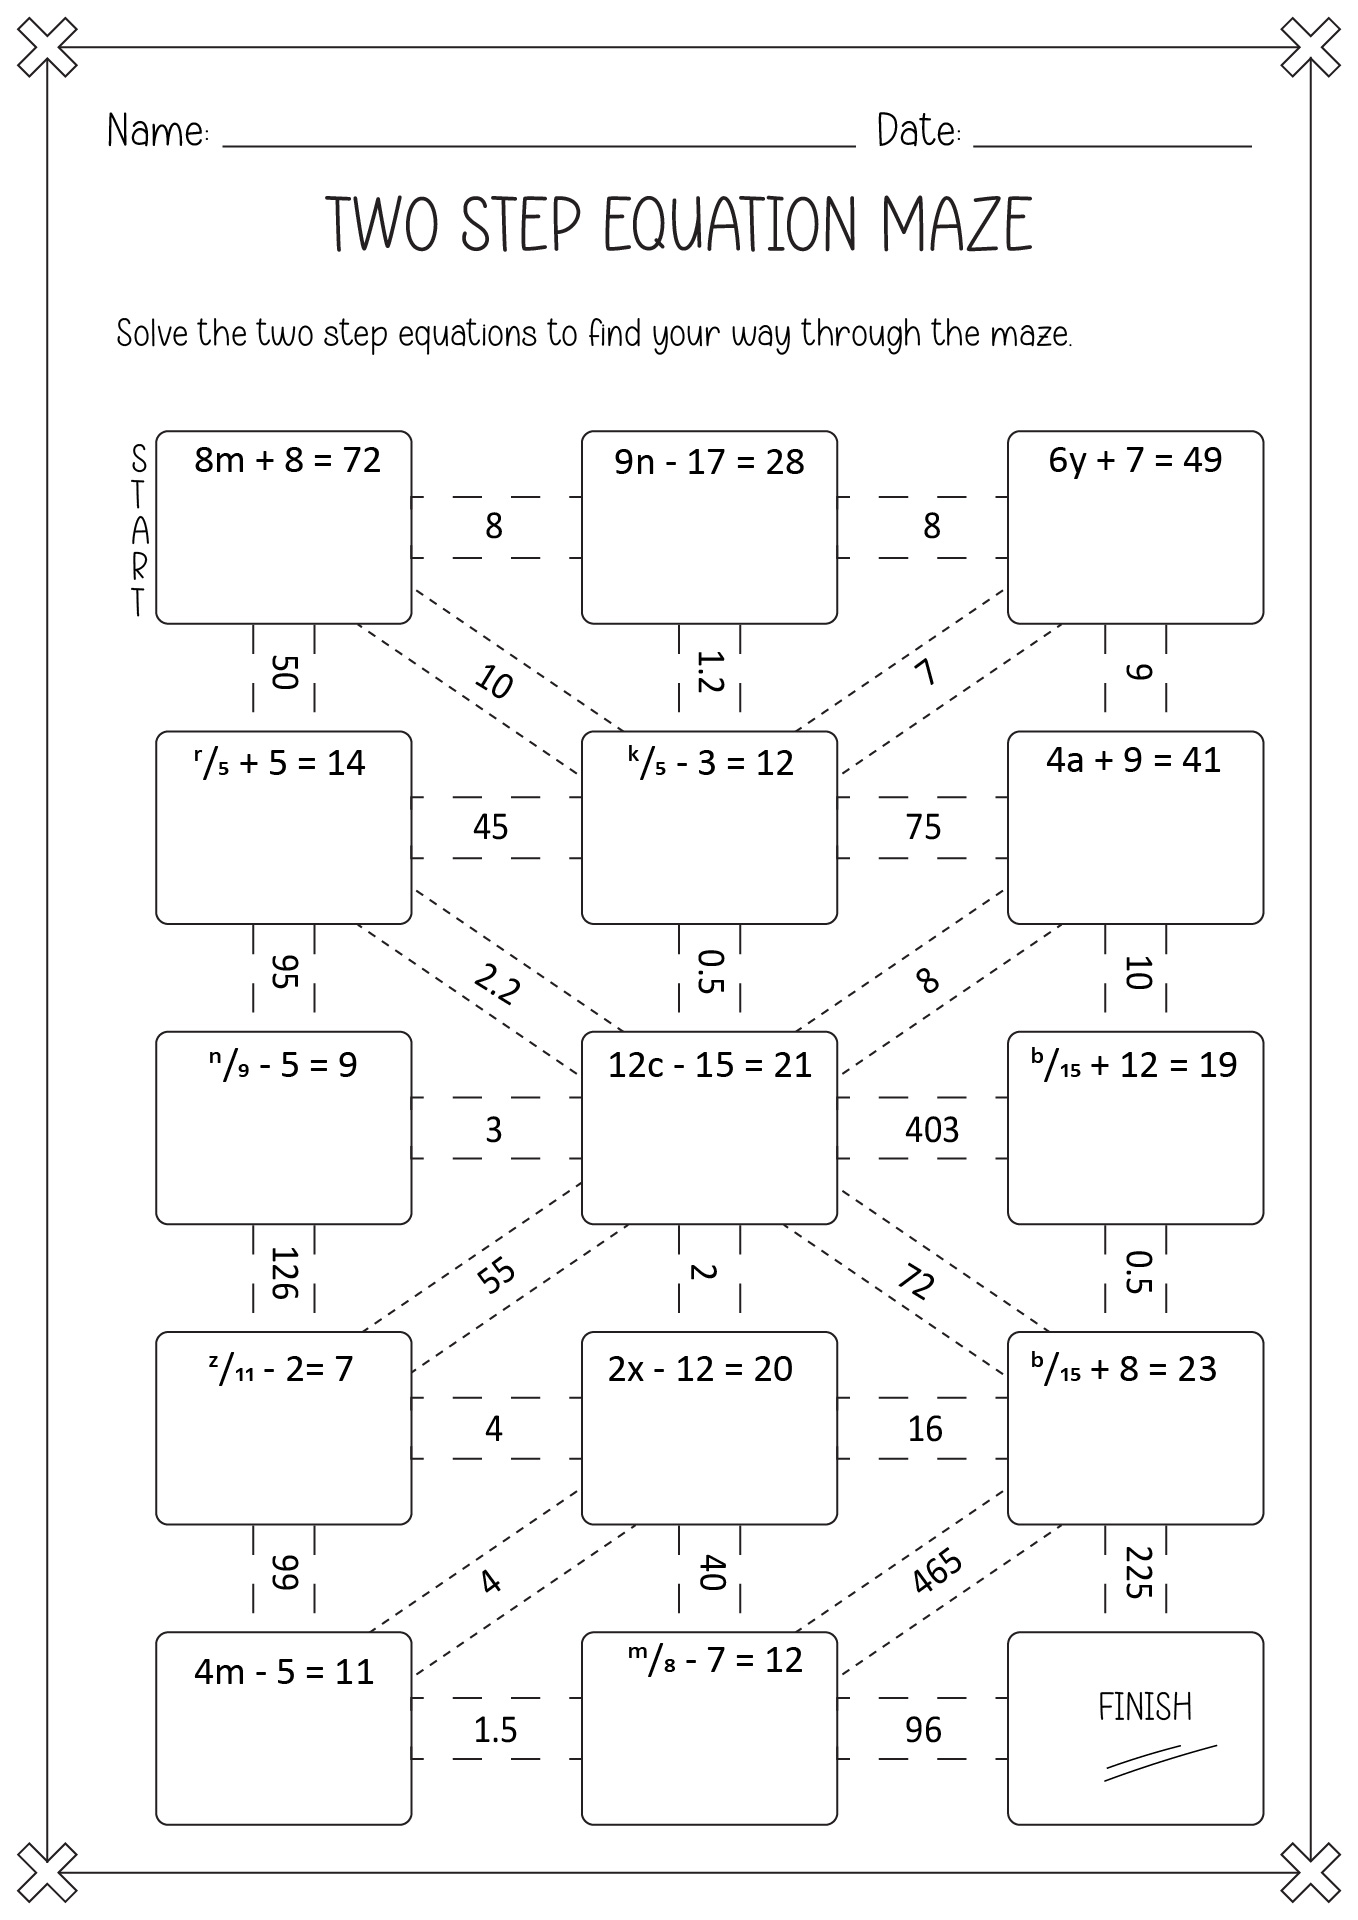 Two-Step Equation Maze Answers